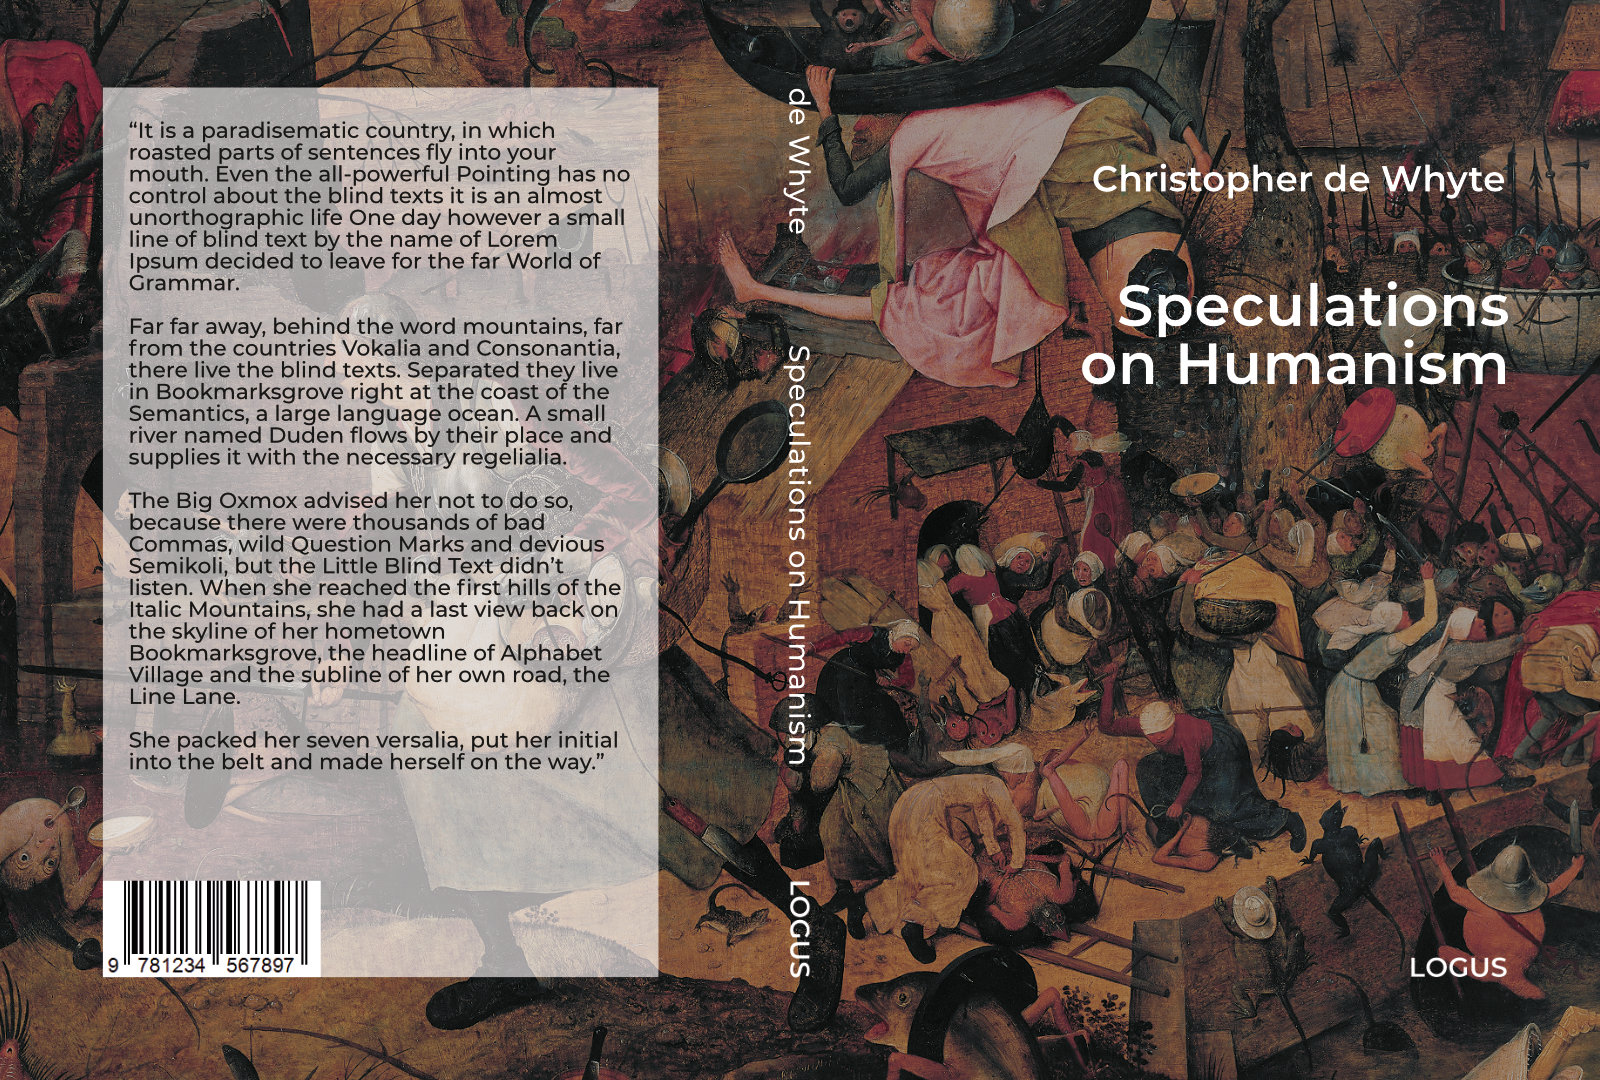 Title: Speculations on Humanism, Philosophy and Psychoanalysis in contemporary Context